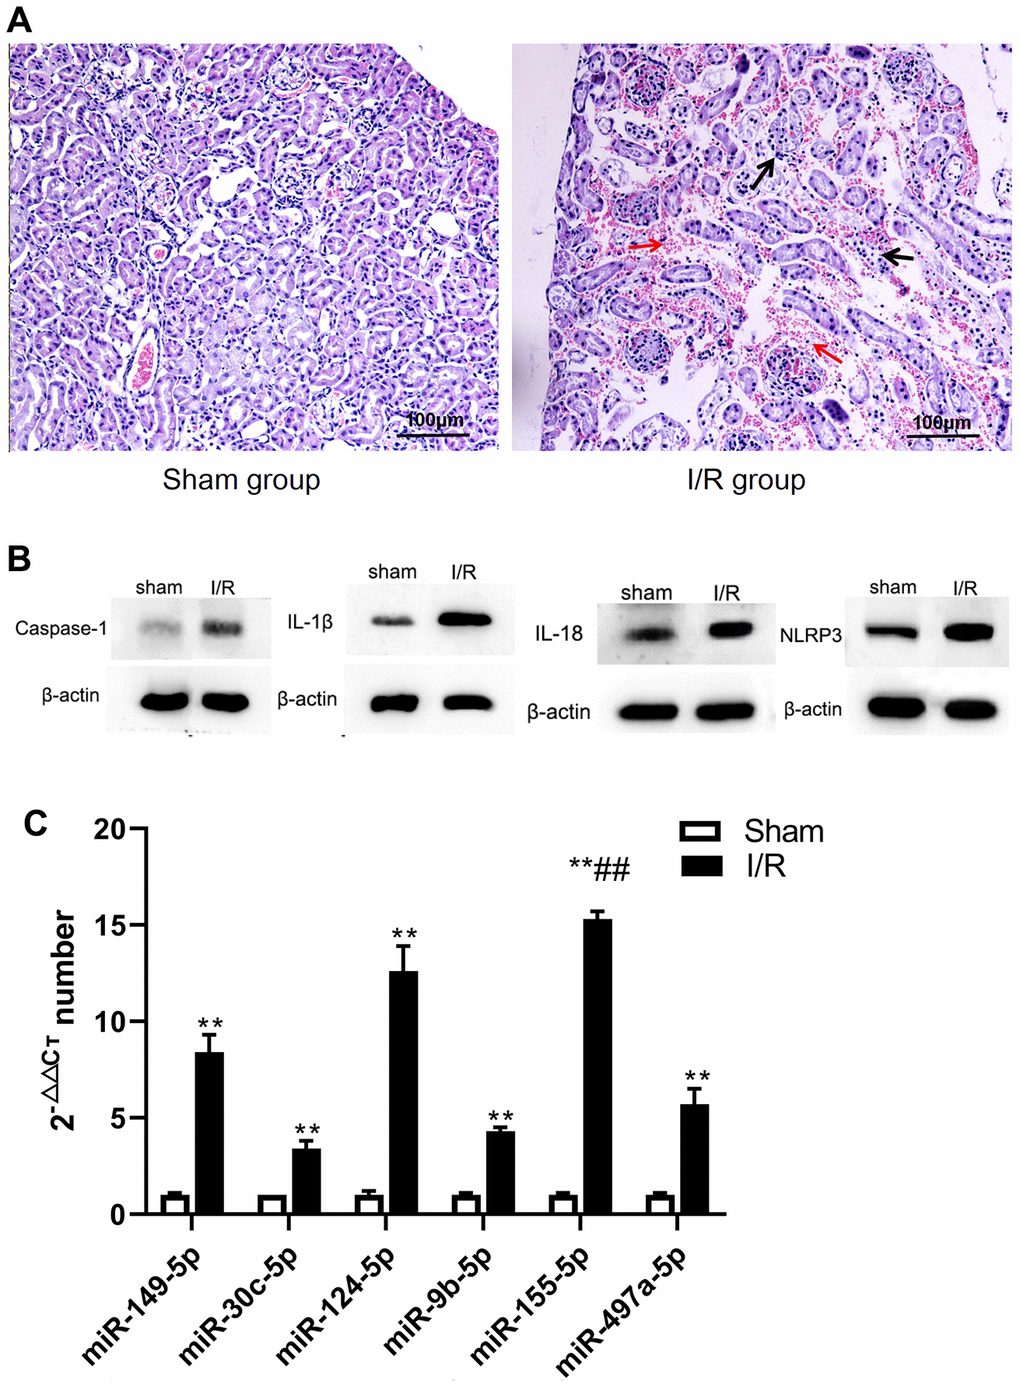 The changes of renal pathological, microRNA and pyroptosis related factors in sham and I/R group. (A) Pathological changes of renal tissue (400 ×). (B) microRNA changes. (C) Expression of caspase-1, IL-1β, IL-18. and NLRP3. (**p